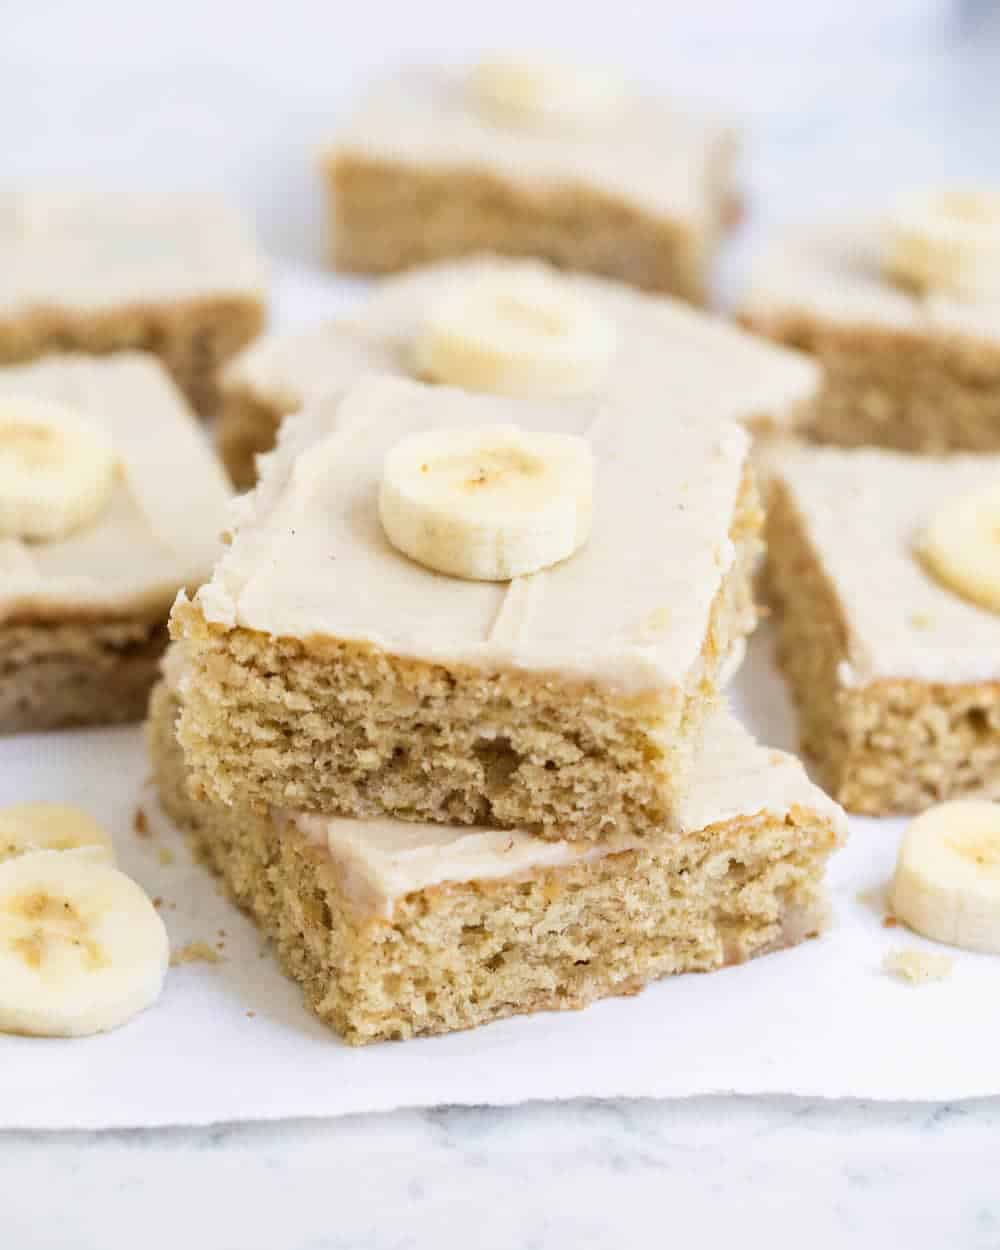 Banana bars with brown butter frosting.